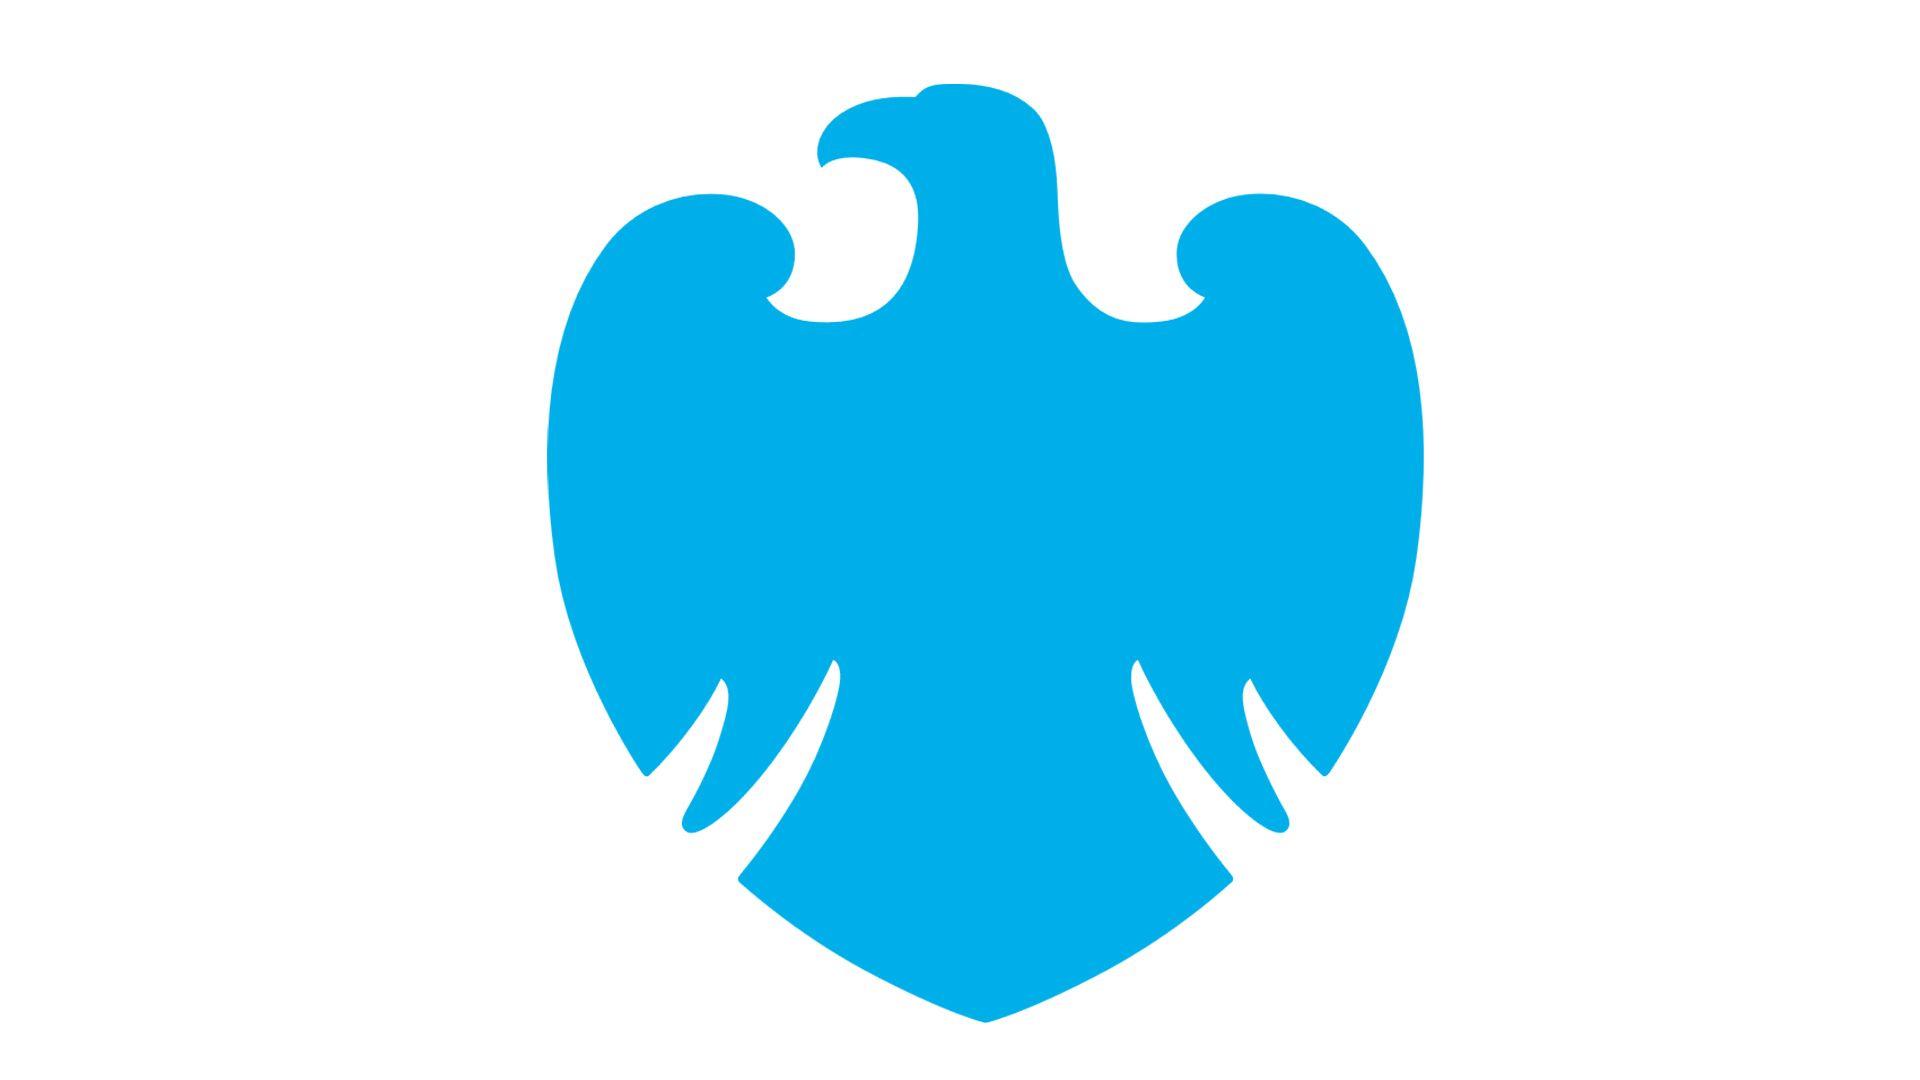 Eagle Blue Logo - Barclays Logo, Barclays Symbol Meaning, History and Evolution